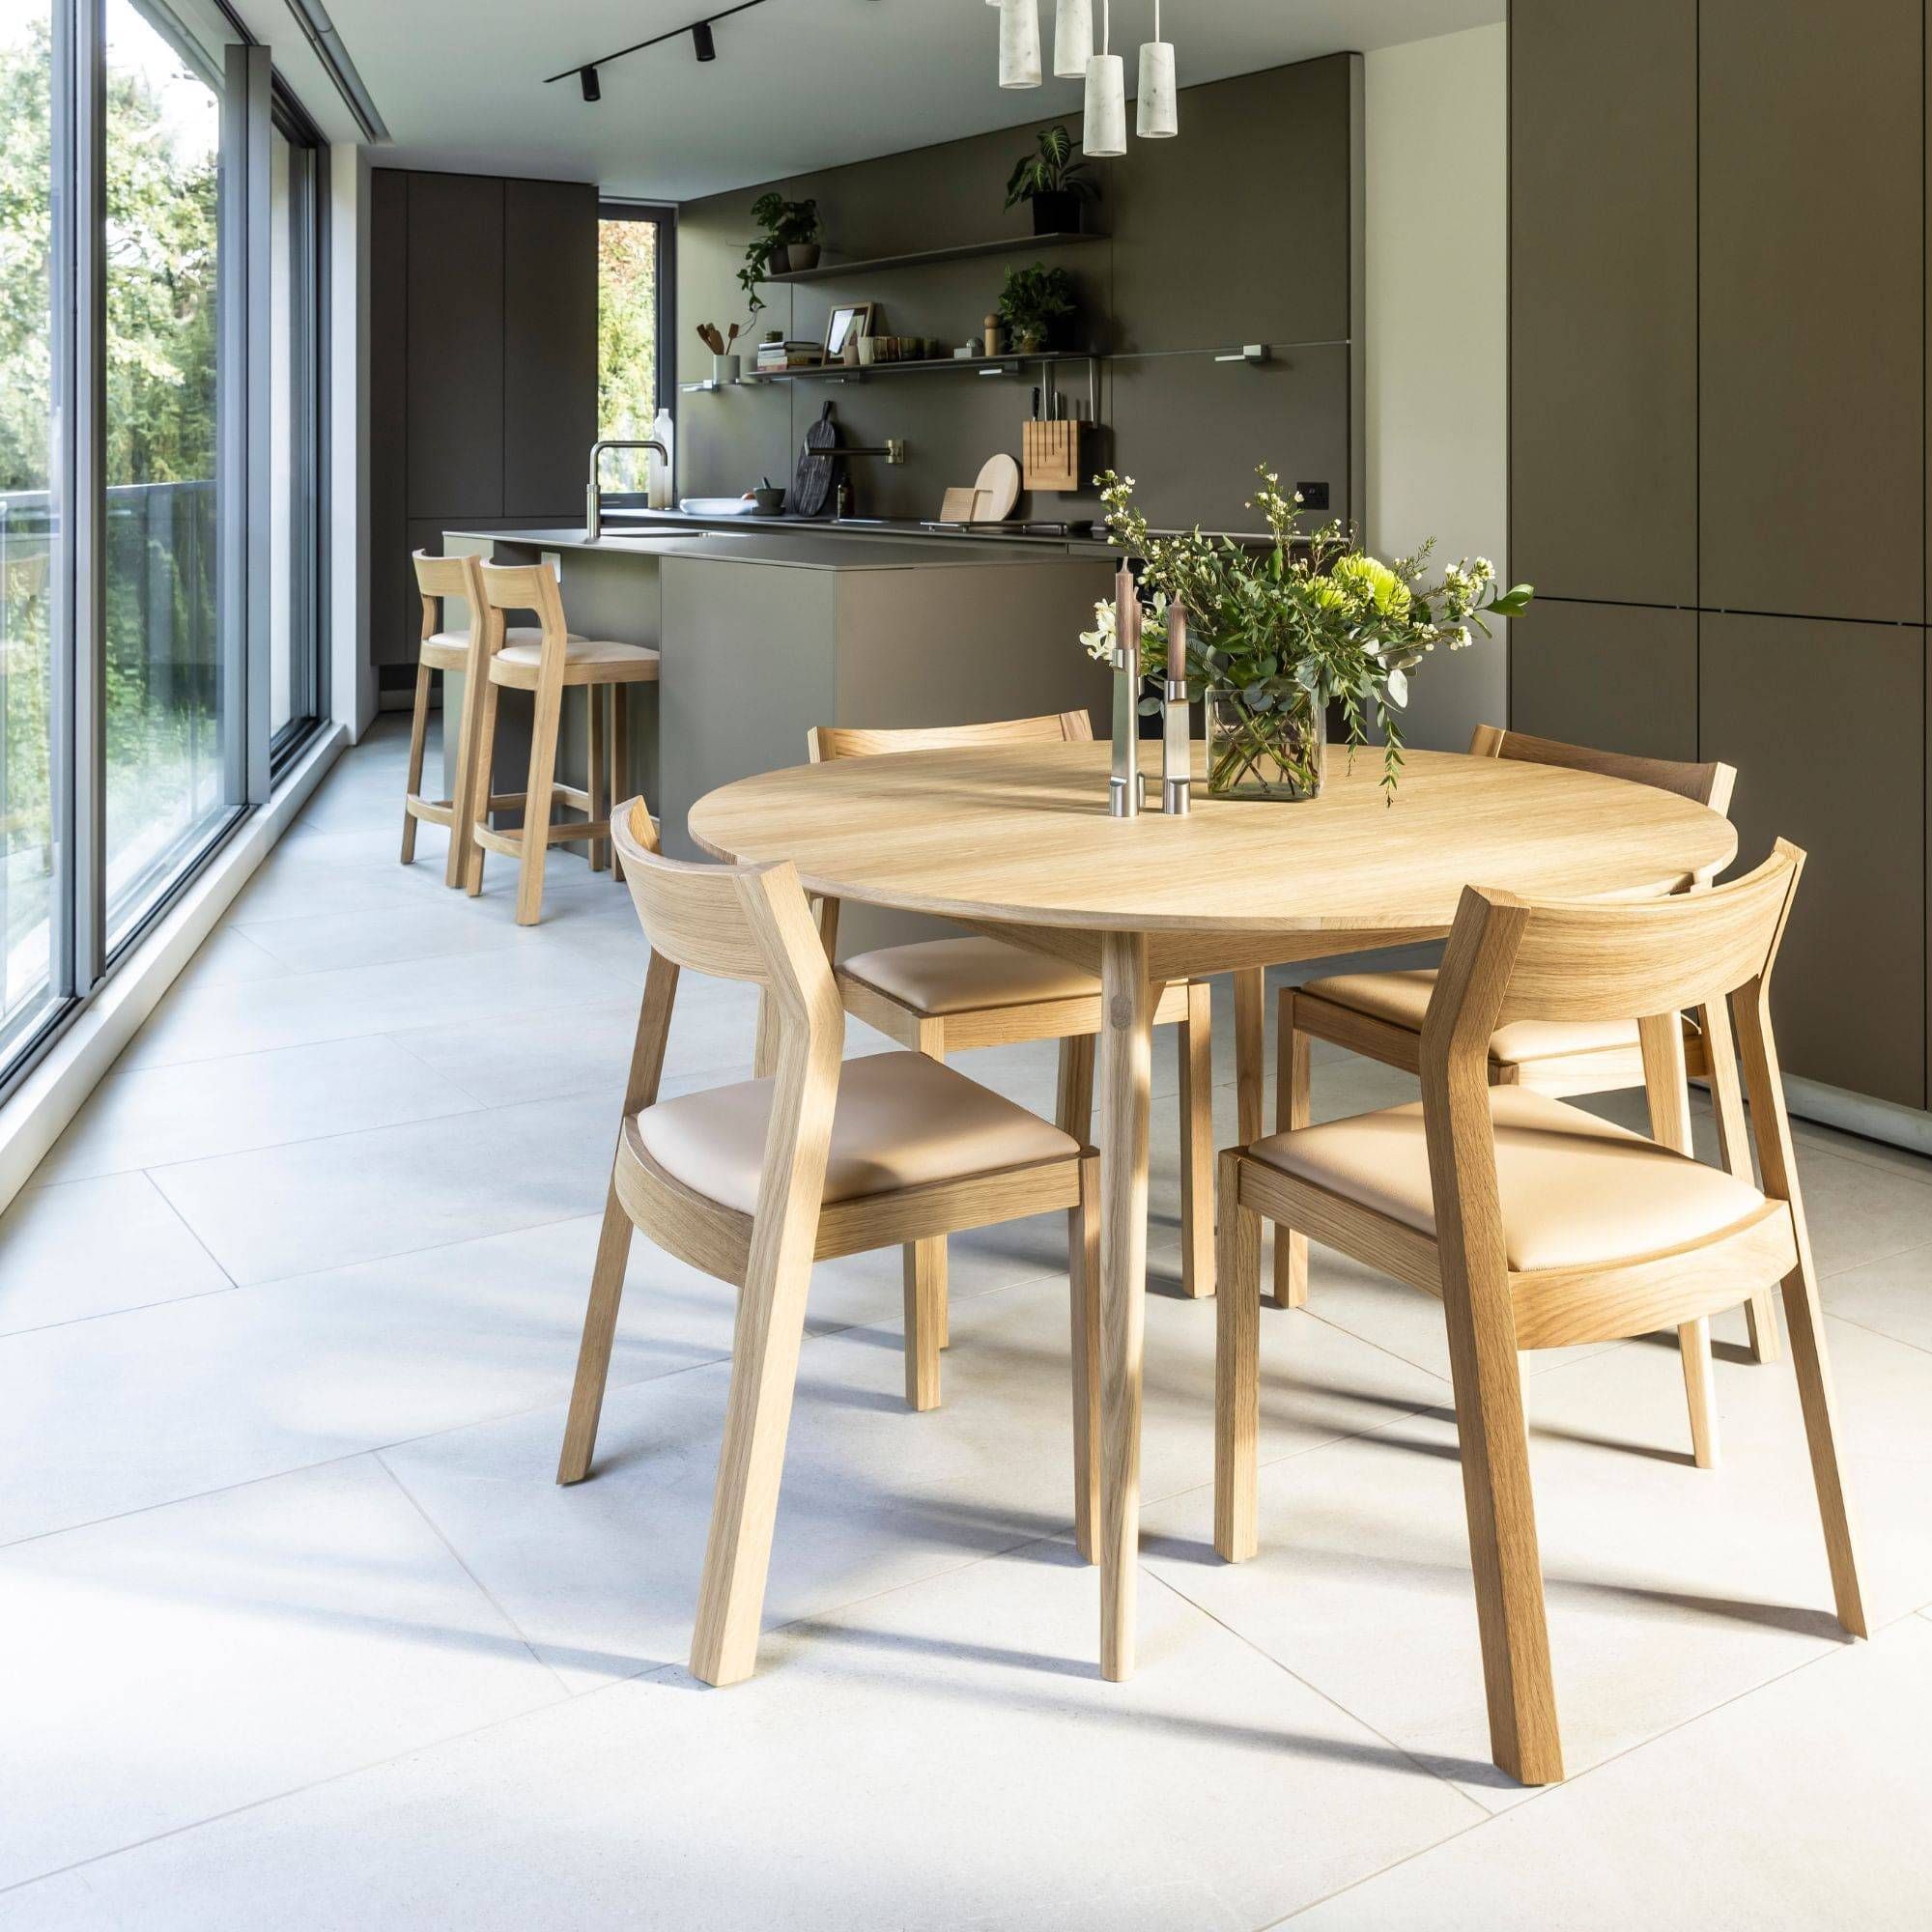 Choosing the Perfect Dining Set for Your Kitchen